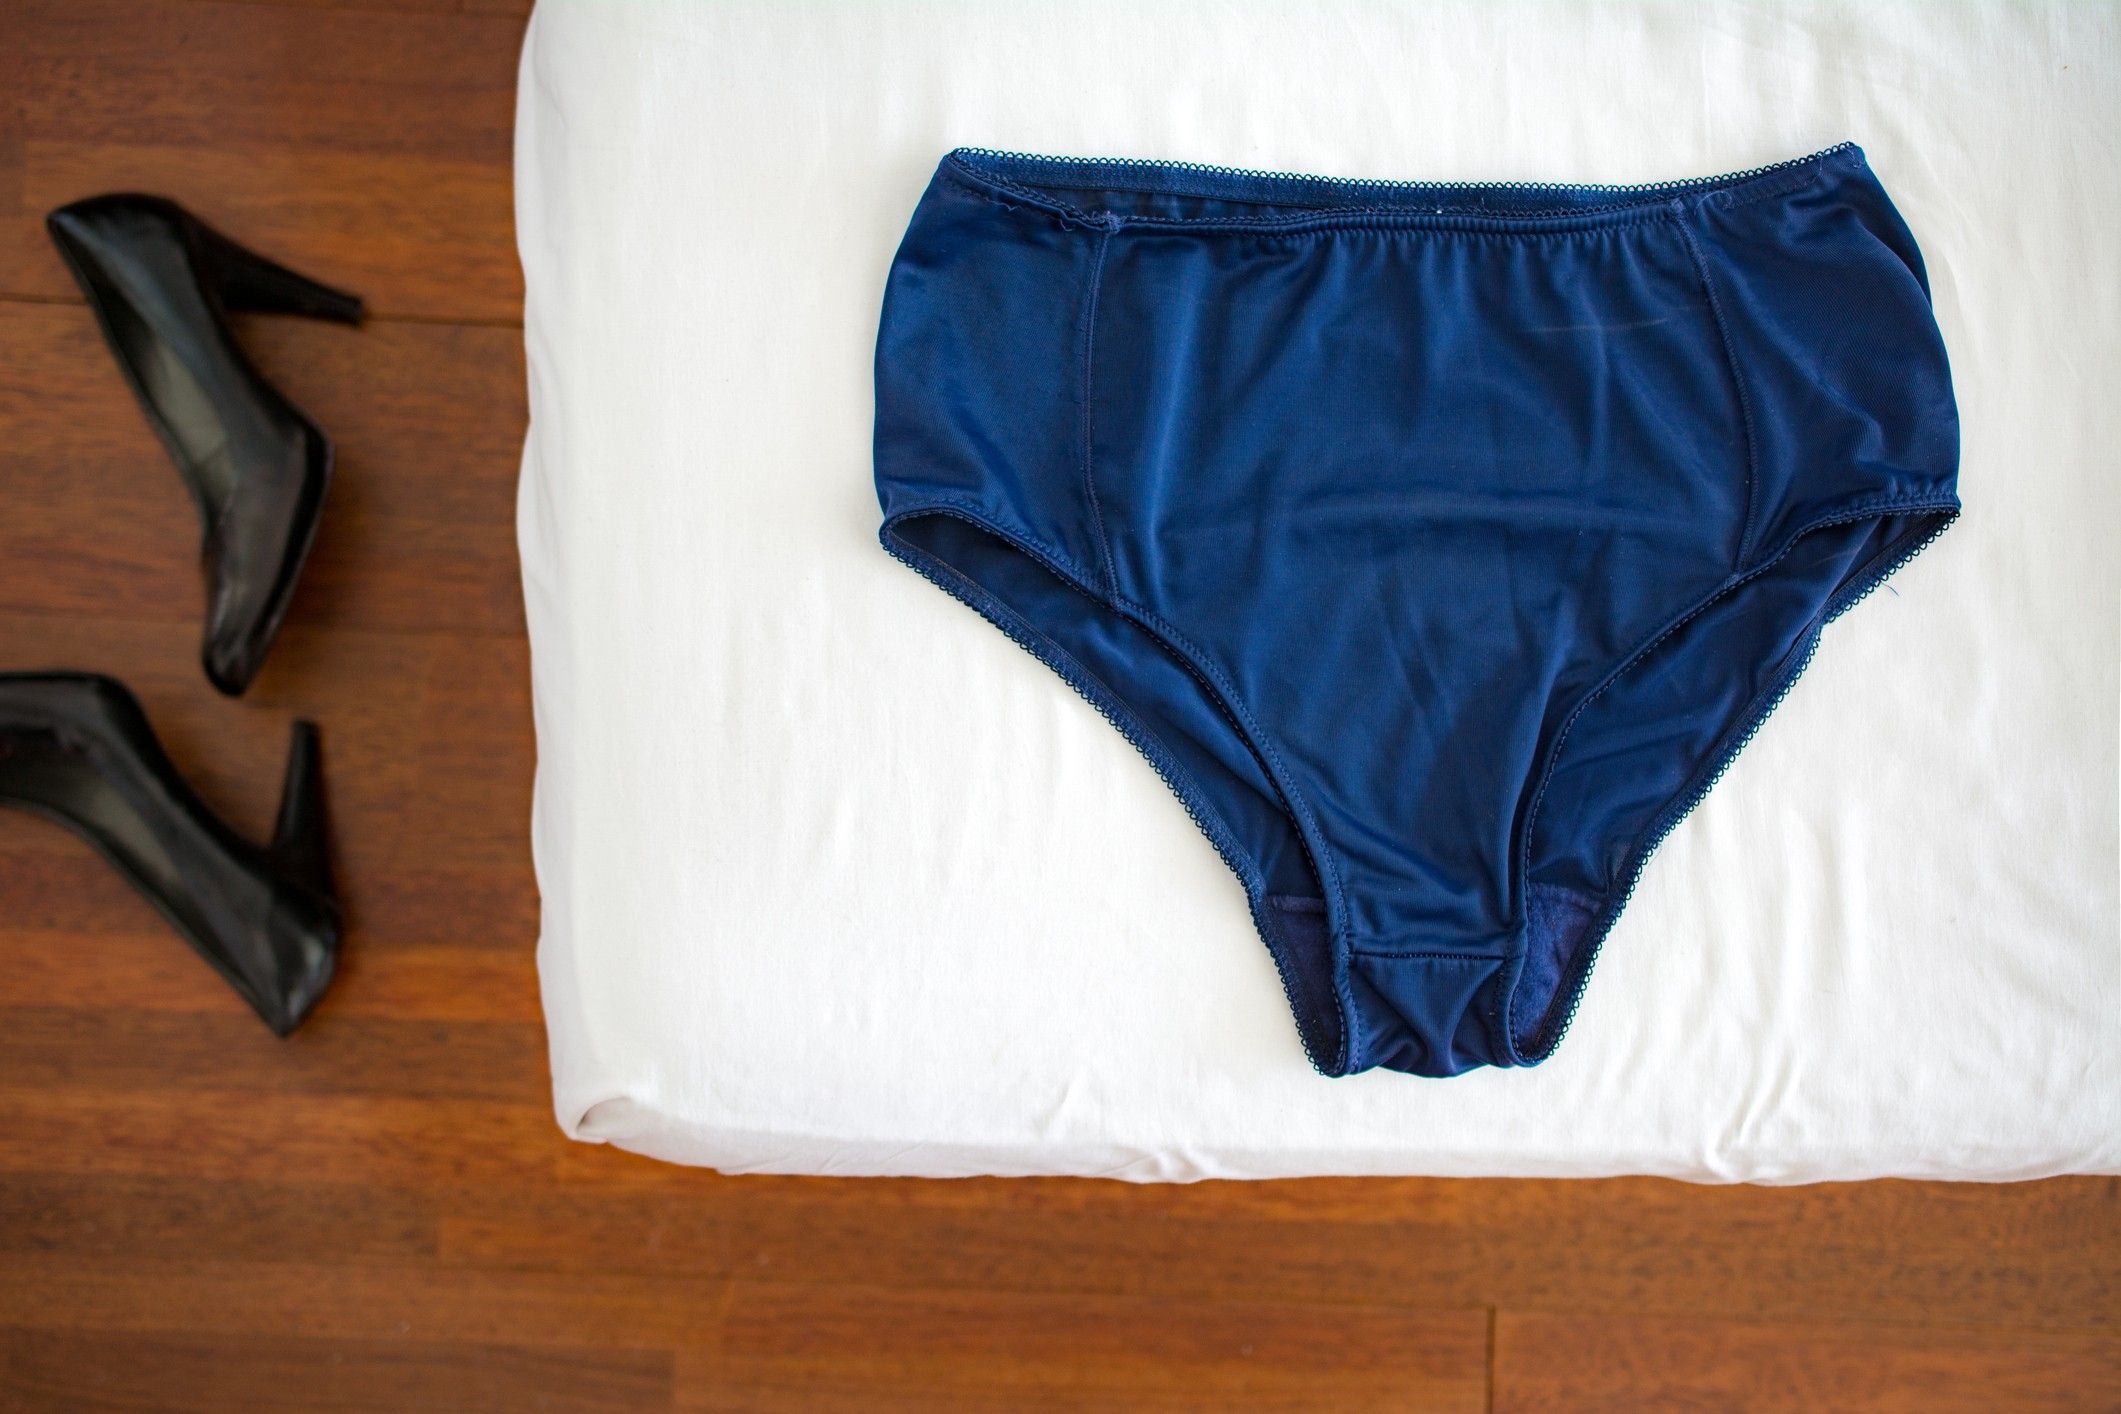 10 Women On Why They Stopped Wearing Panties Underwear photo